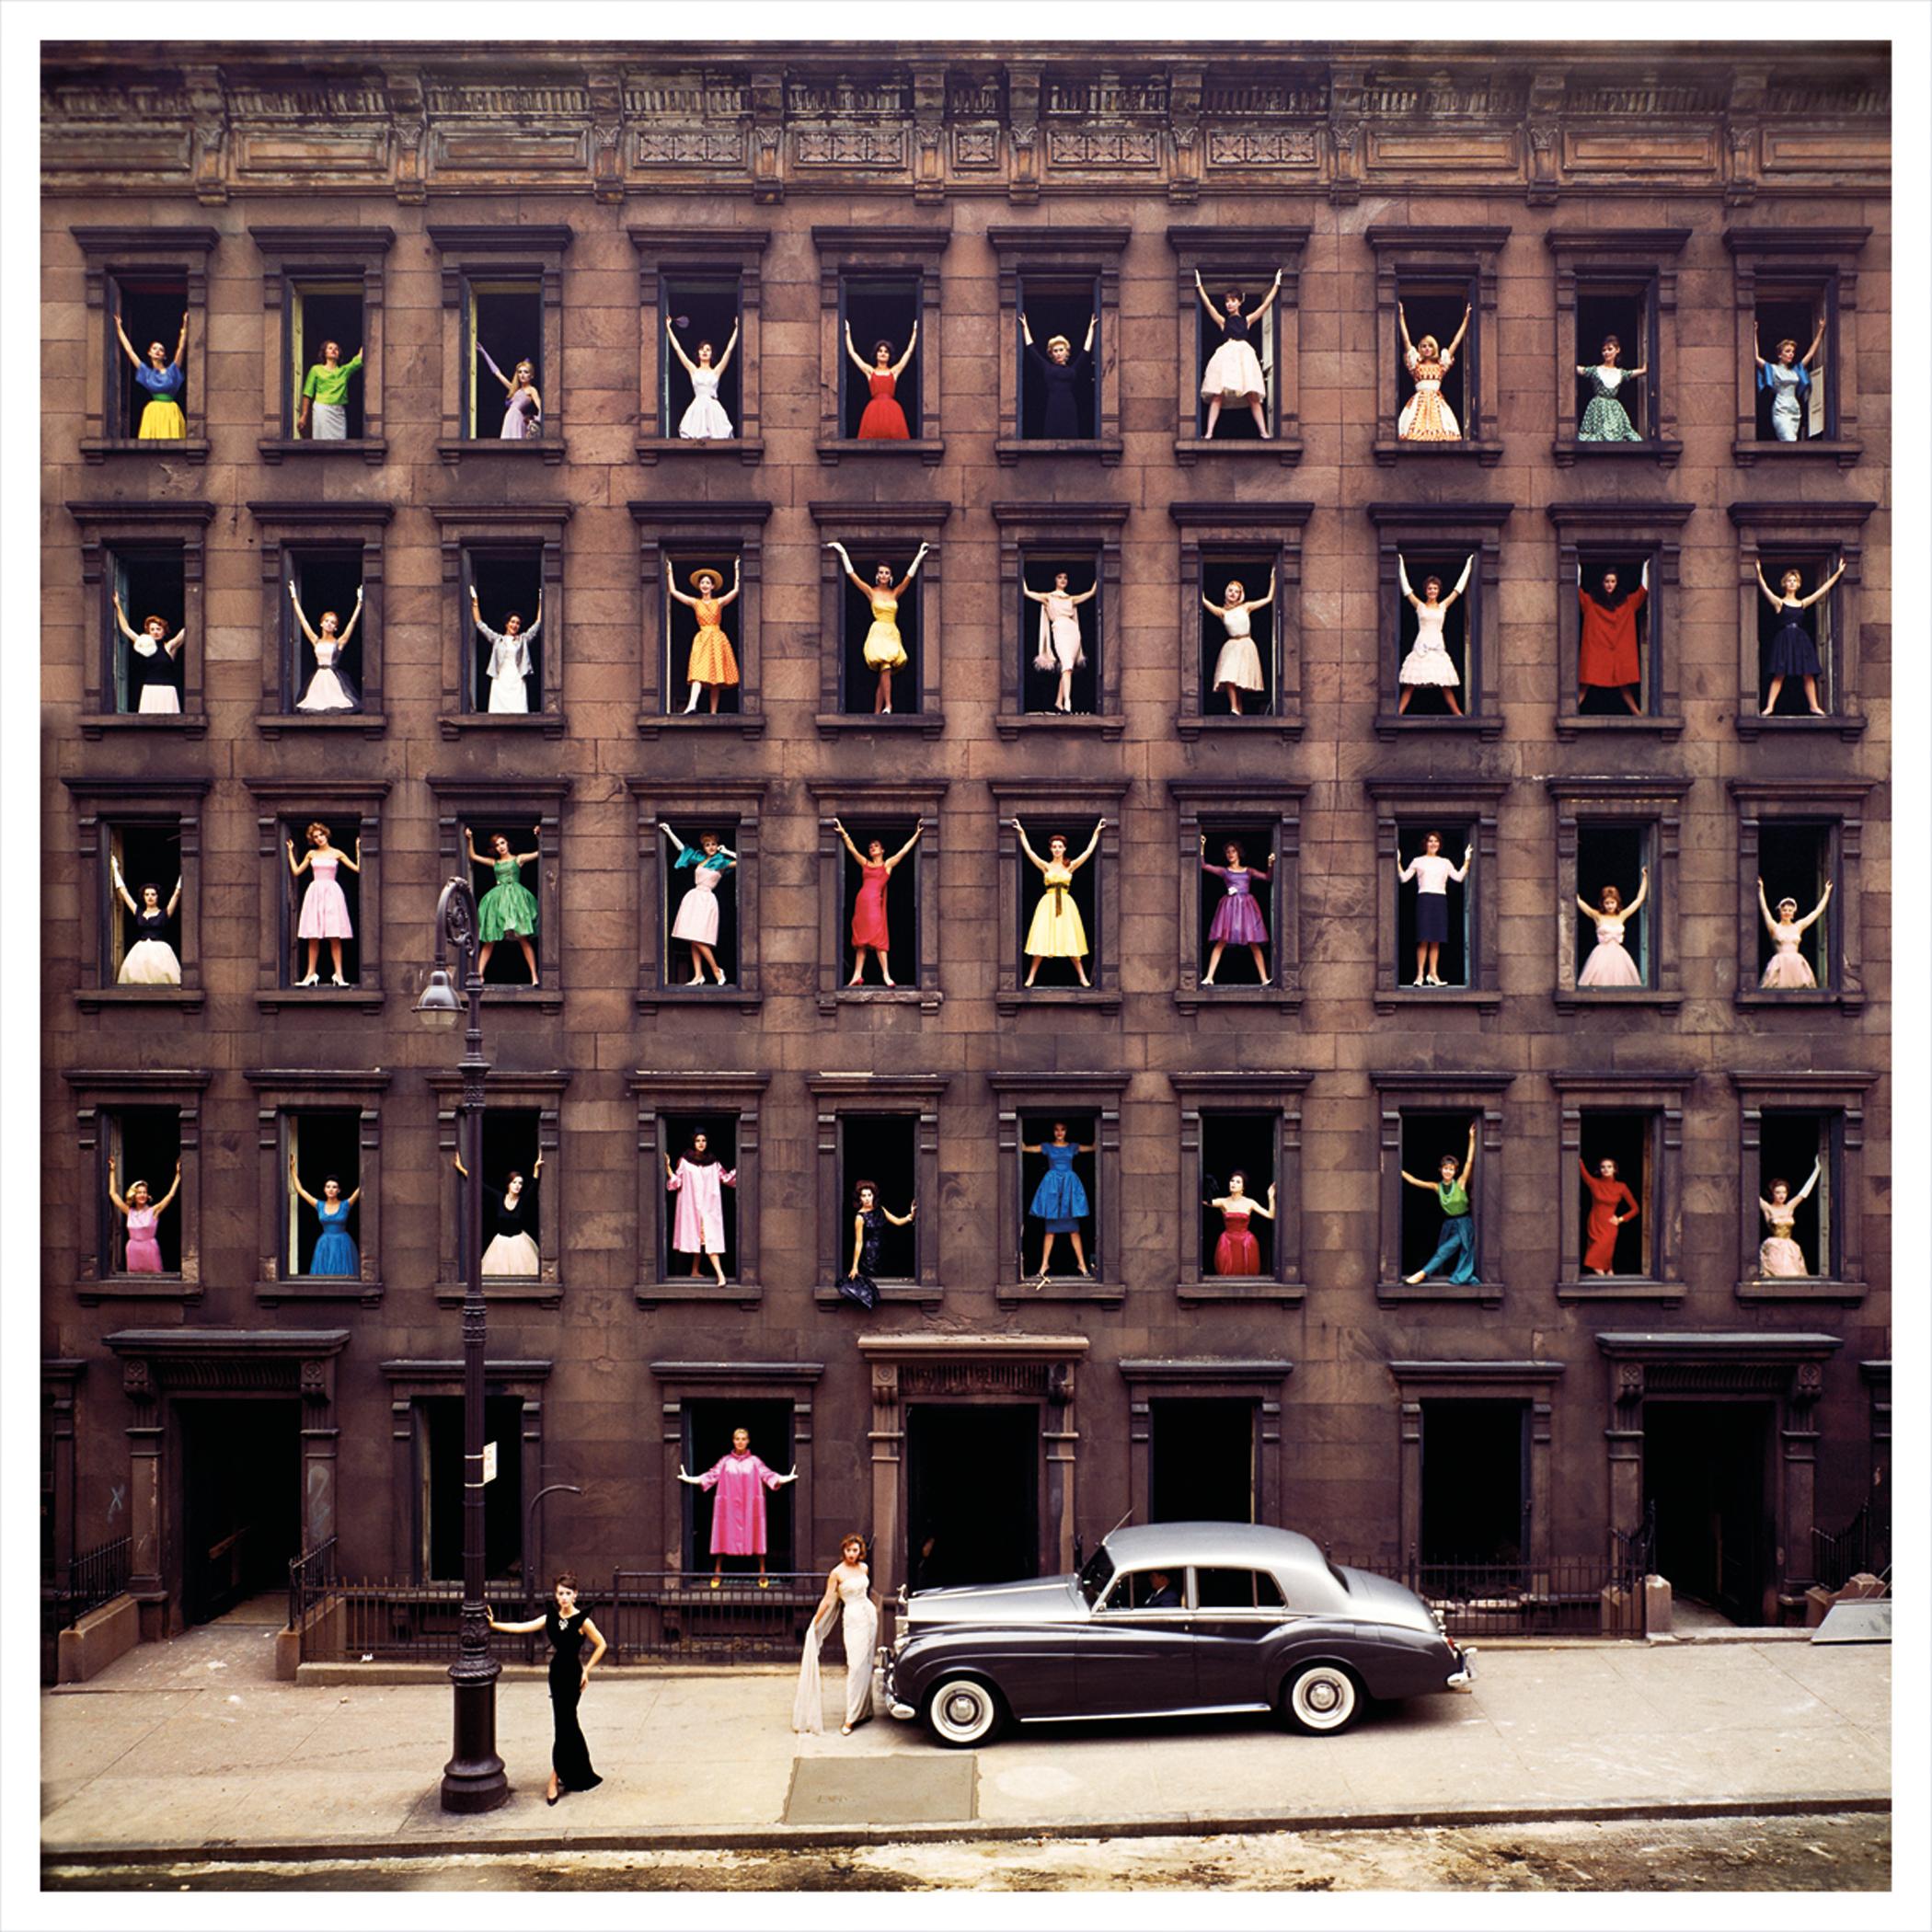 Ormond Gigli
Girls in the Window, 1960 (printed later)
Color coupler print
16 x 16 inches
edition of 100
Signed, numbered and dated by the artist

Ormond Gigli: The Visionary Behind the "Girls in the Windows"
Ormond Gigli is a highly regarded